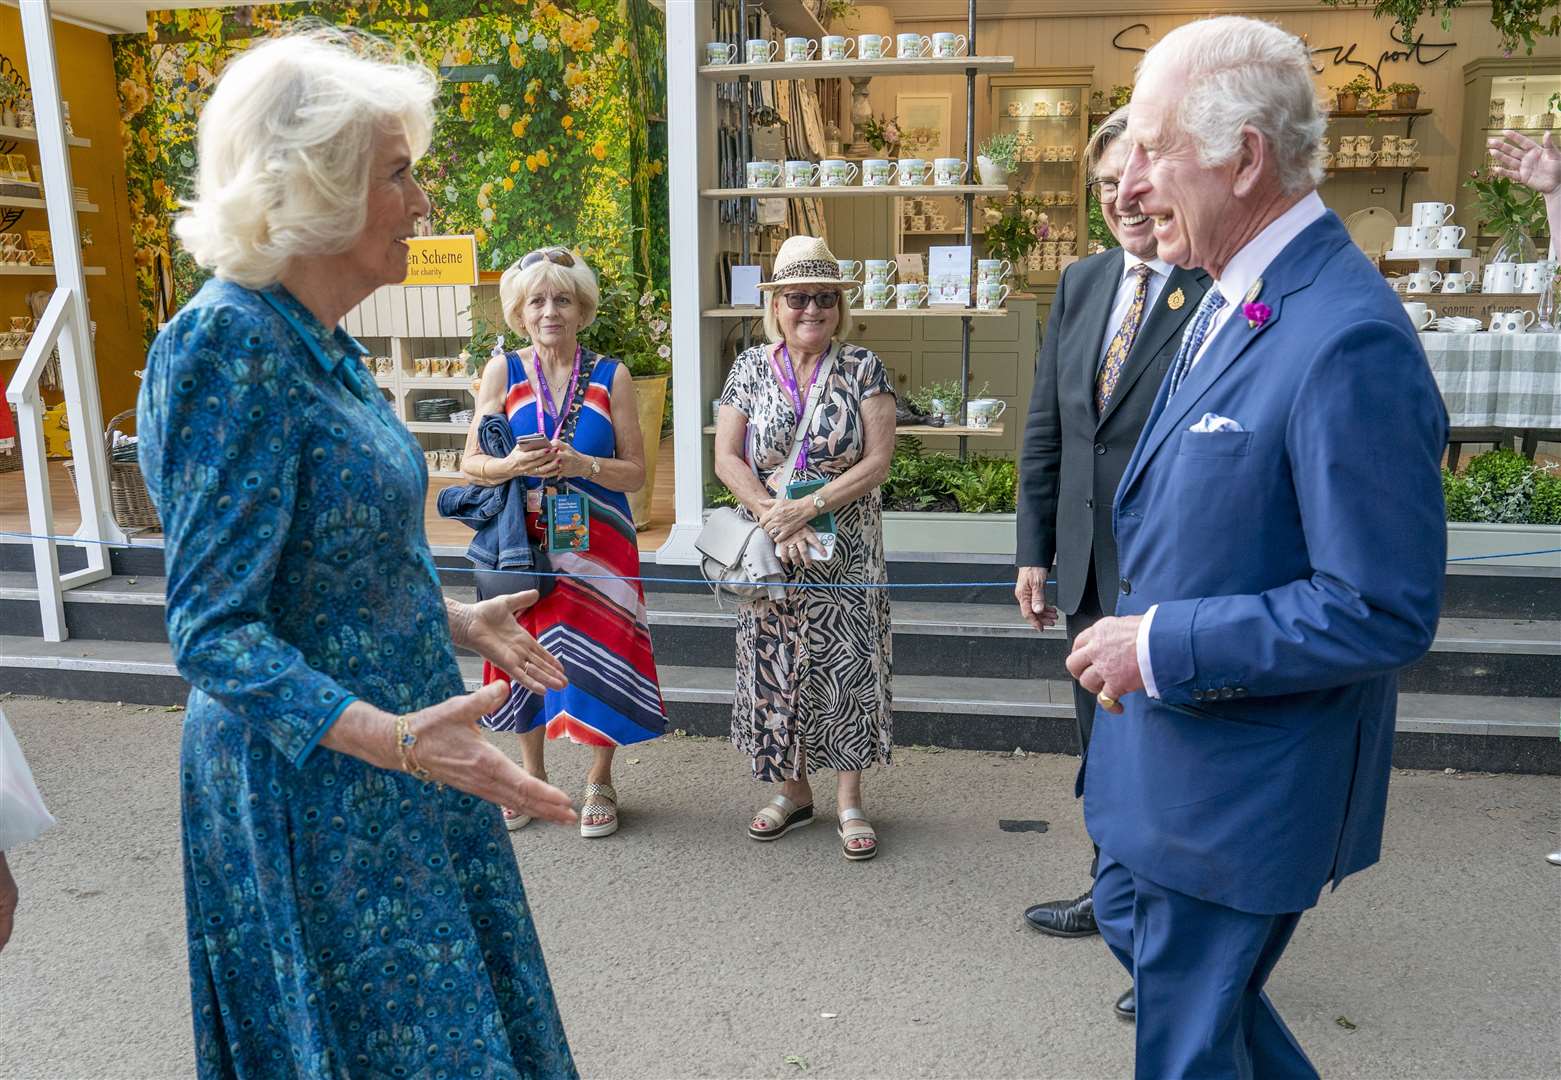 The King and Queen during a visit to the RHS Chelsea Flower Show (Arthur Edwards/The Sun/PA)